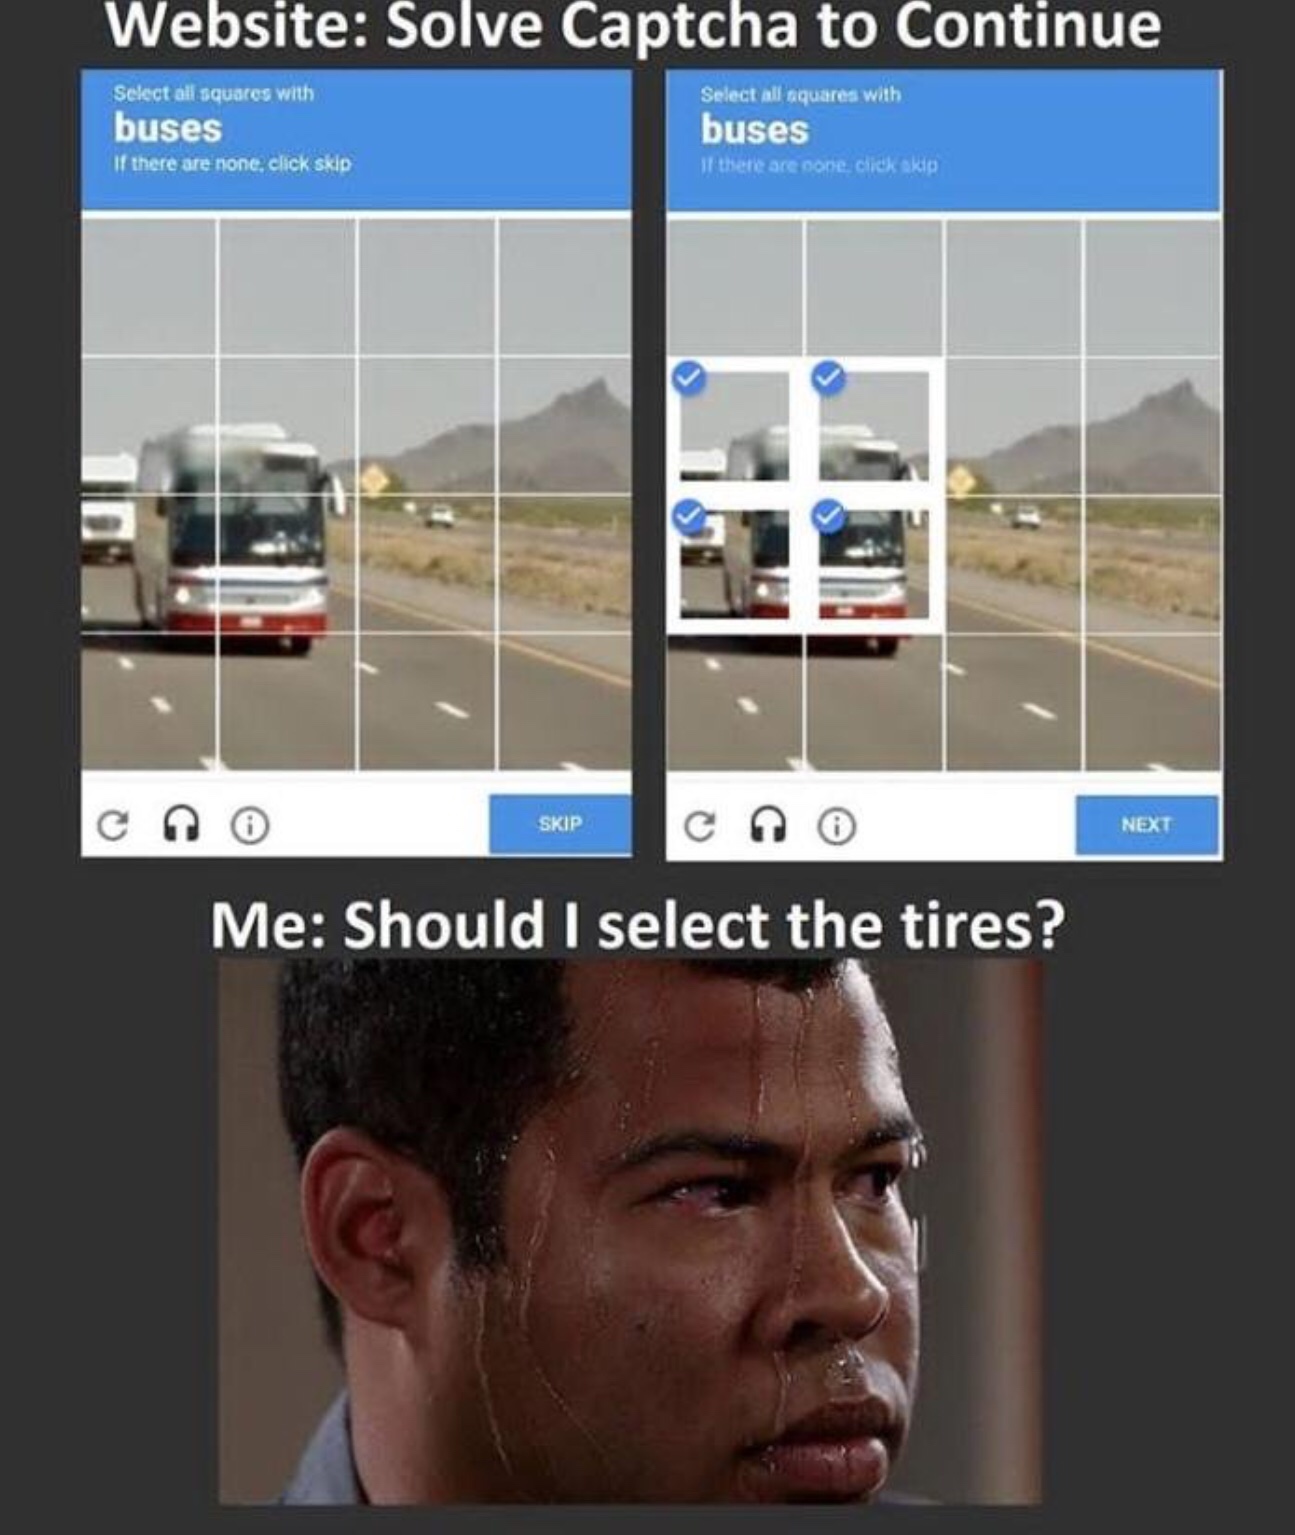 dank meme of Humour - Website Solve Captcha to Continue Select all squares with buses If there are none, click skip Select all squares with buses If there are one click skip Skip Next Me Should I select the tires?